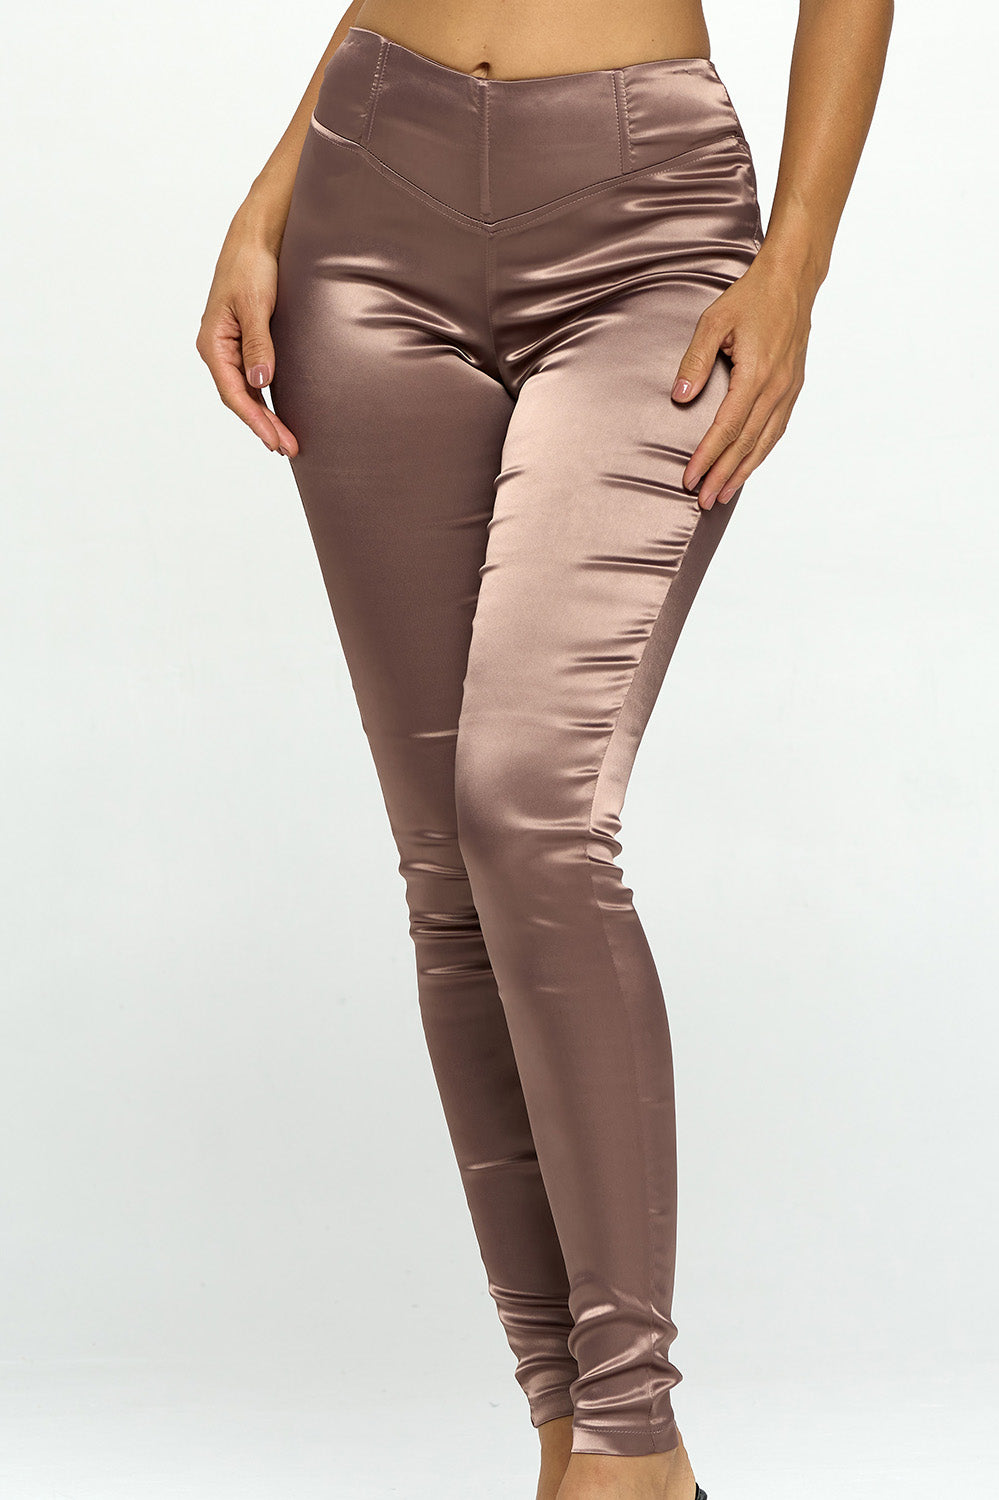 HMGYH satina high waisted leggings for women Button Fly High Waist Skinny  Pants (Size : L) : Buy Online at Best Price in KSA - Souq is now :  Fashion